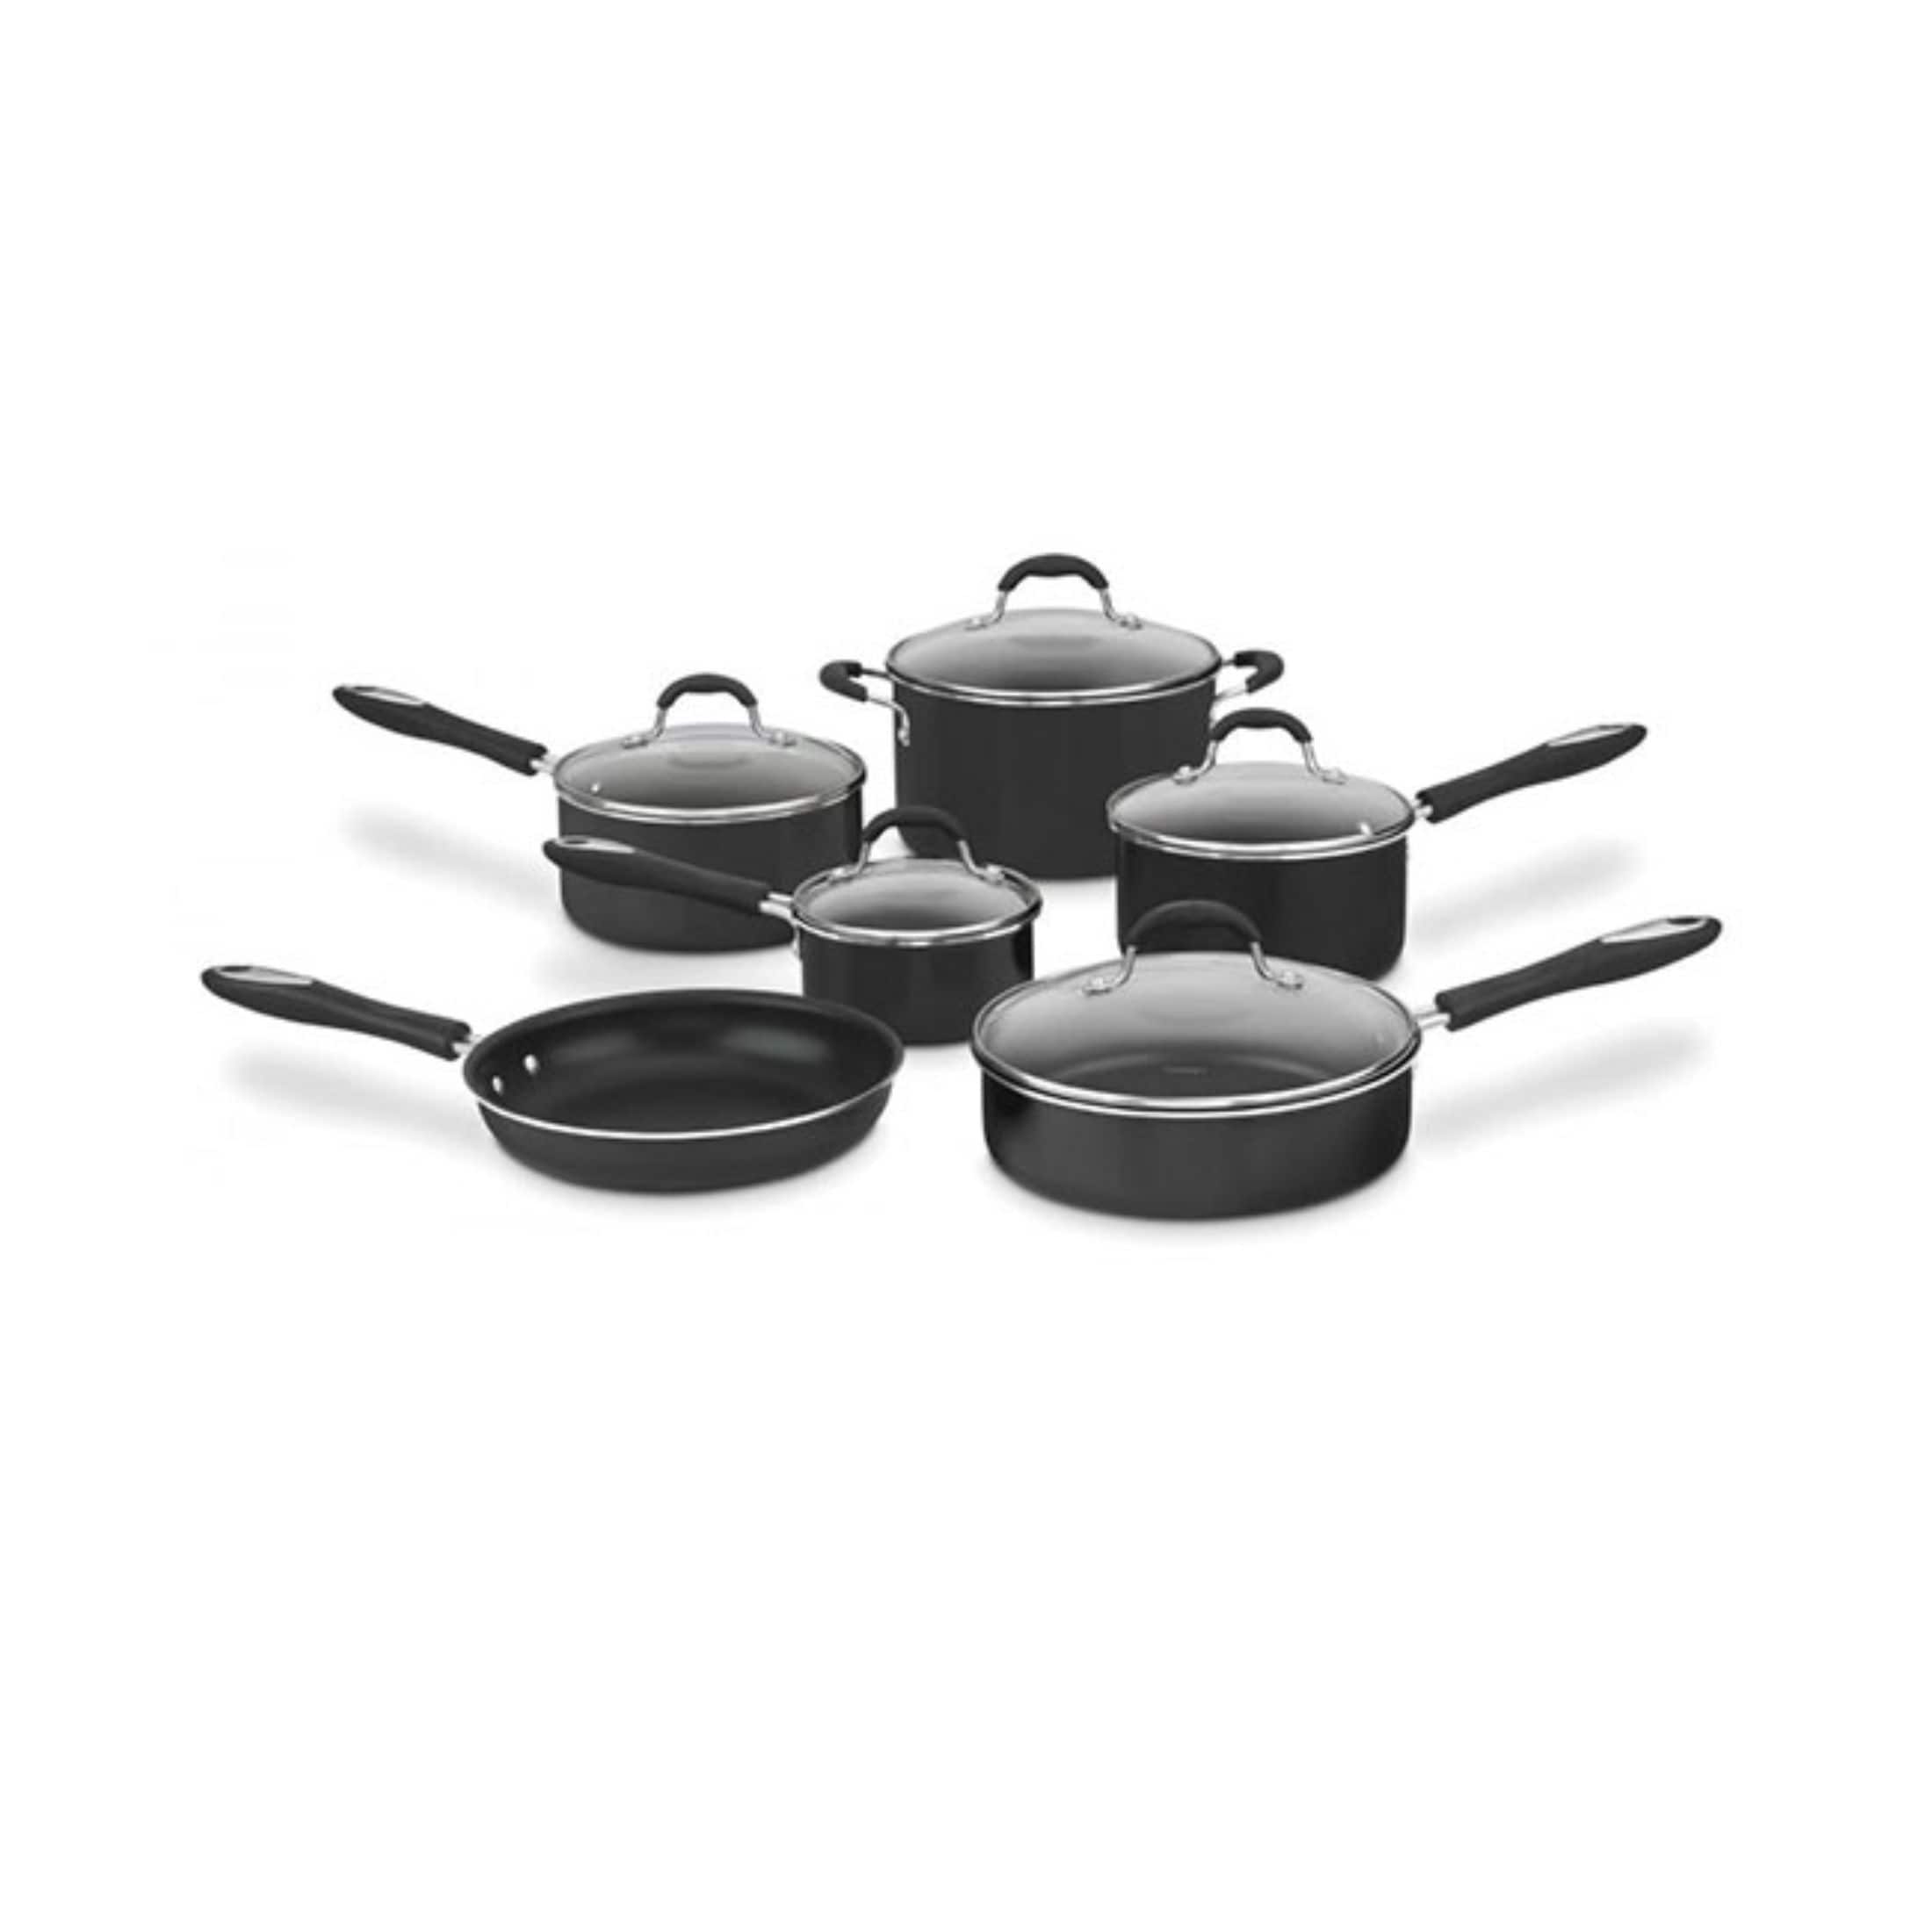 https://ak1.ostkcdn.com/images/products/is/images/direct/549a9ac1ec94733cd0a8b1ea1beed5f69a816e0a/Advantage-Nonstick-%2811-Piece-Set%29.jpg